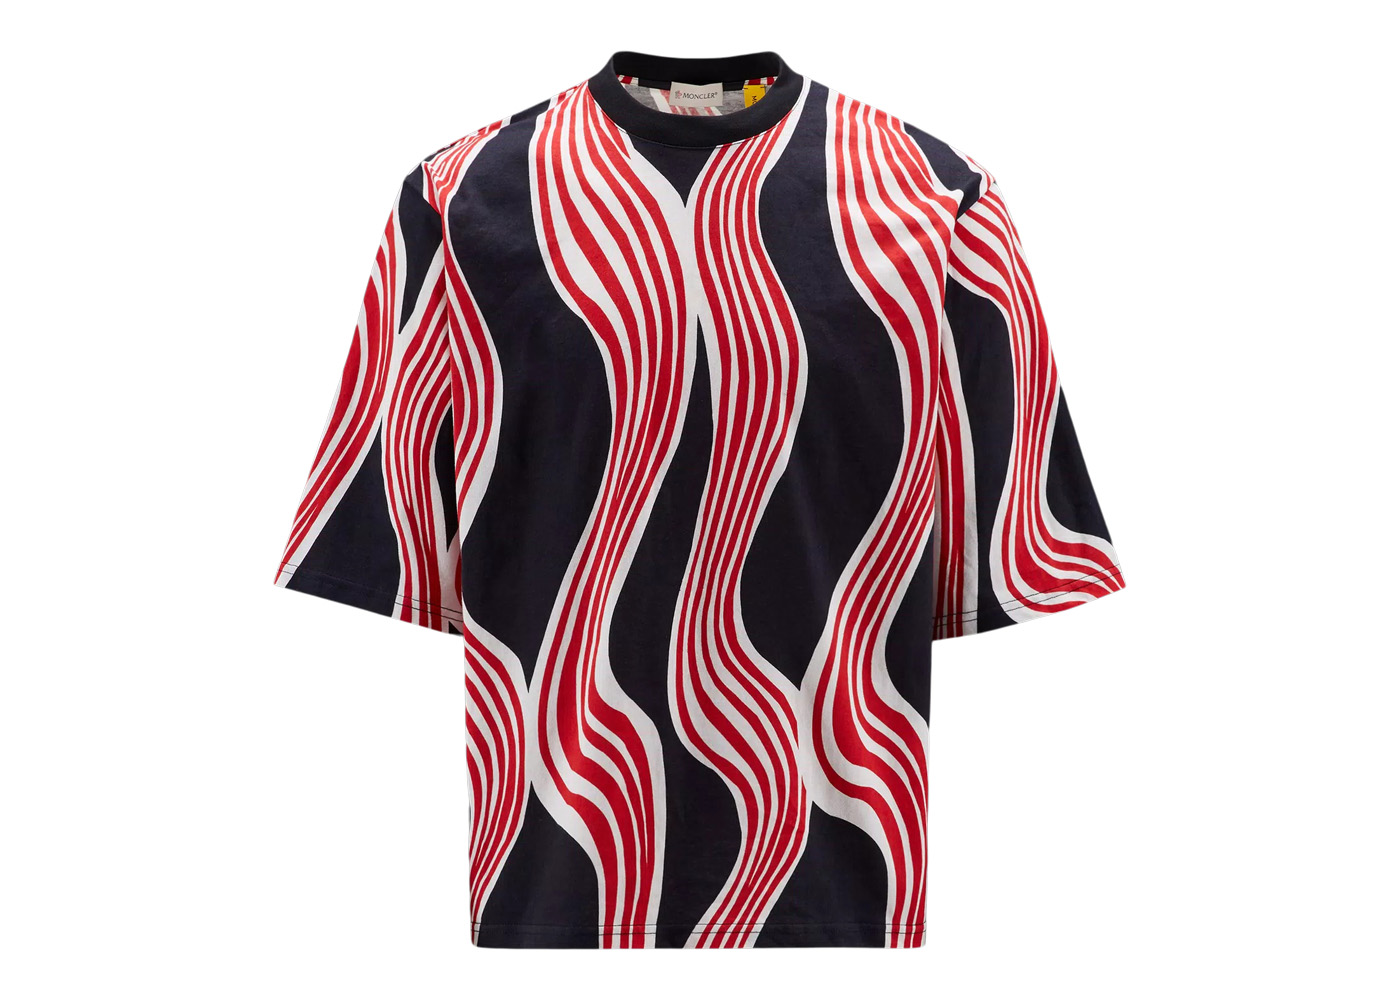 Moncler x JW Anderson Printed T-Shirt White/Red/Black - SS22 - US